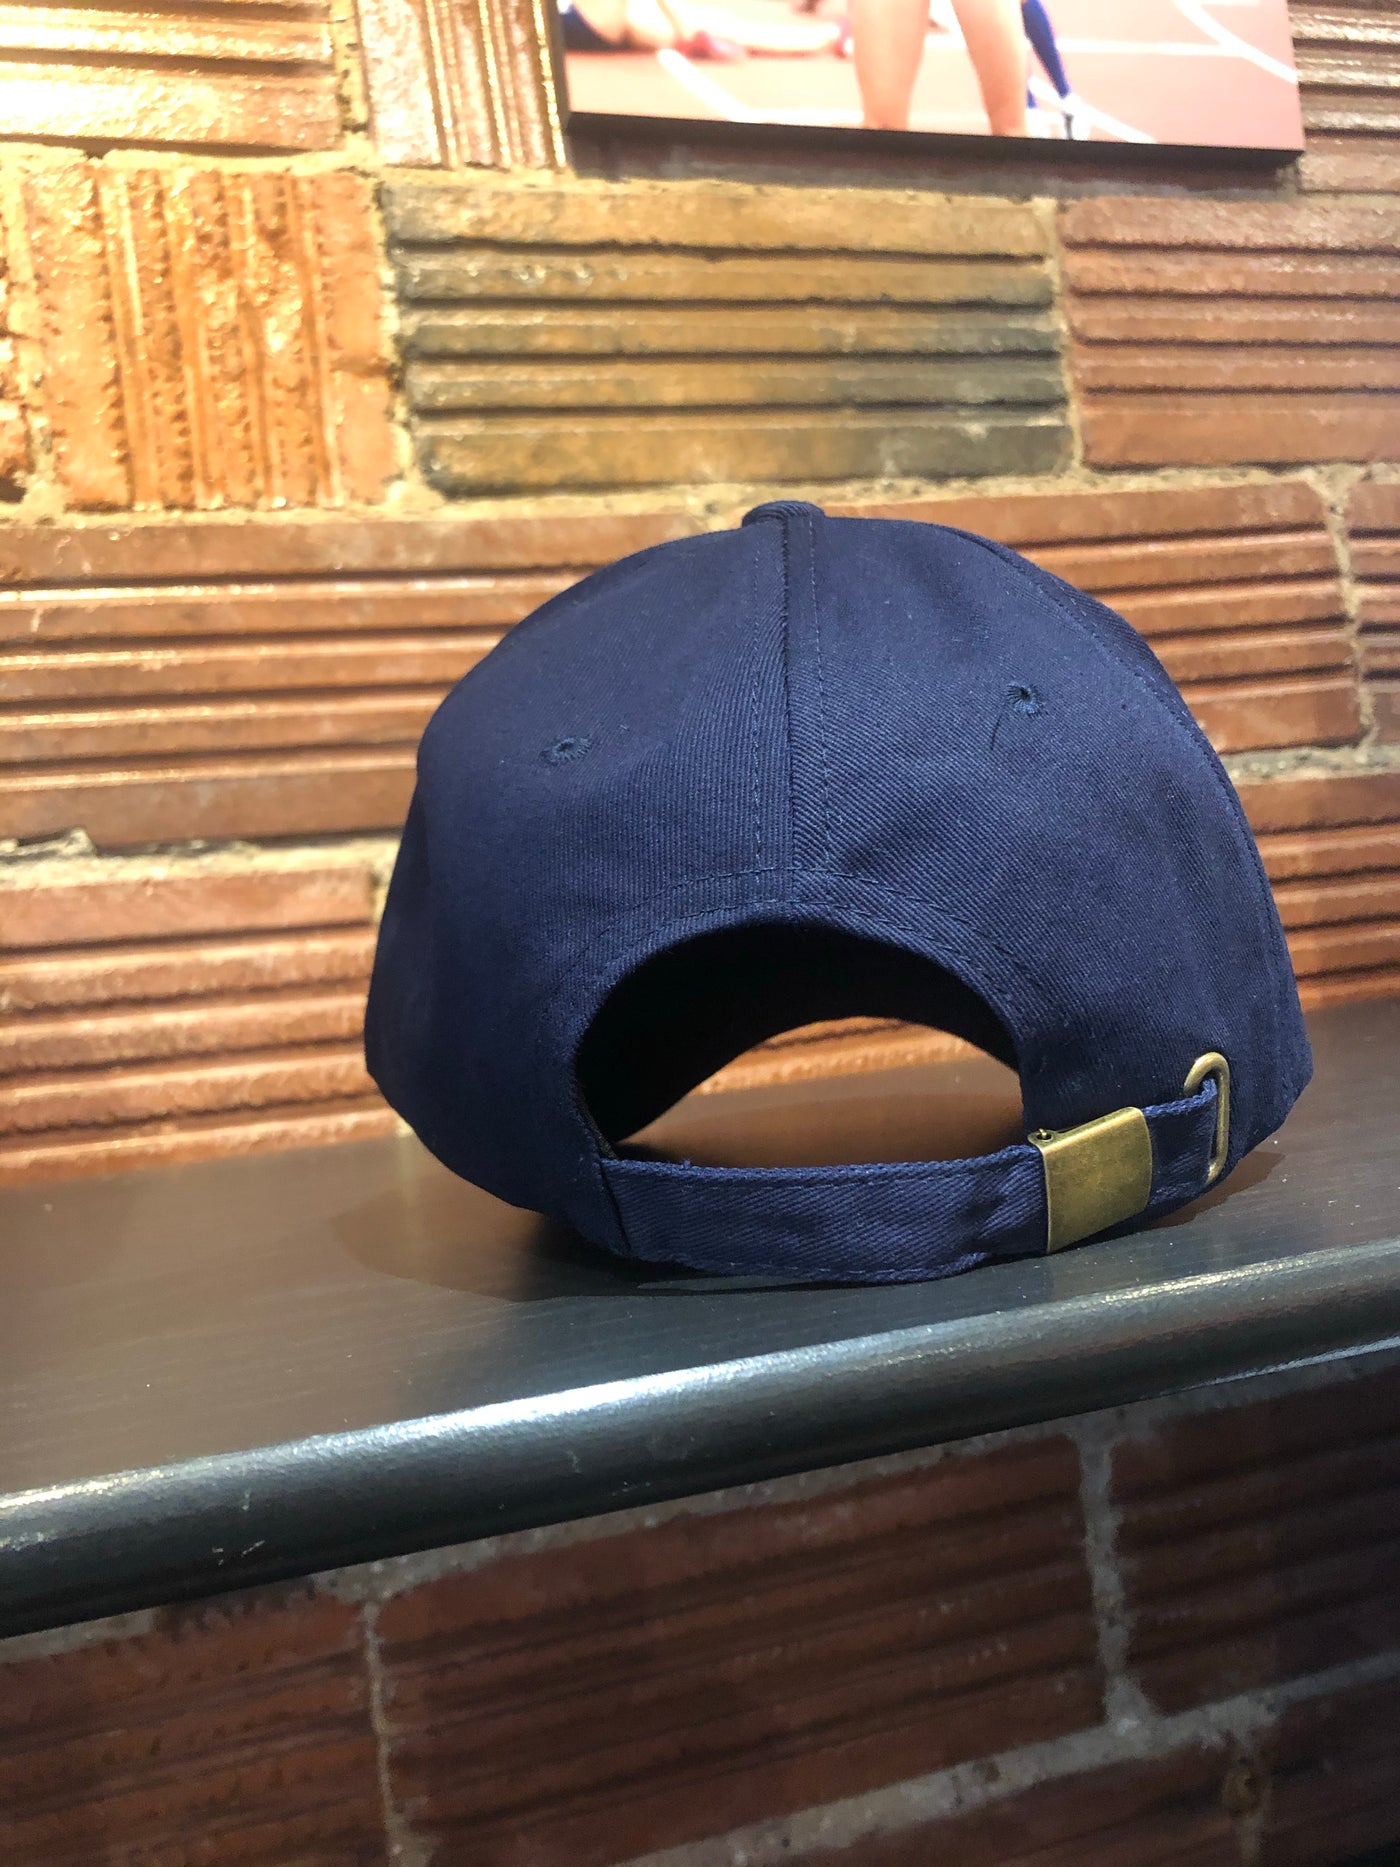 The Runners Shop hat